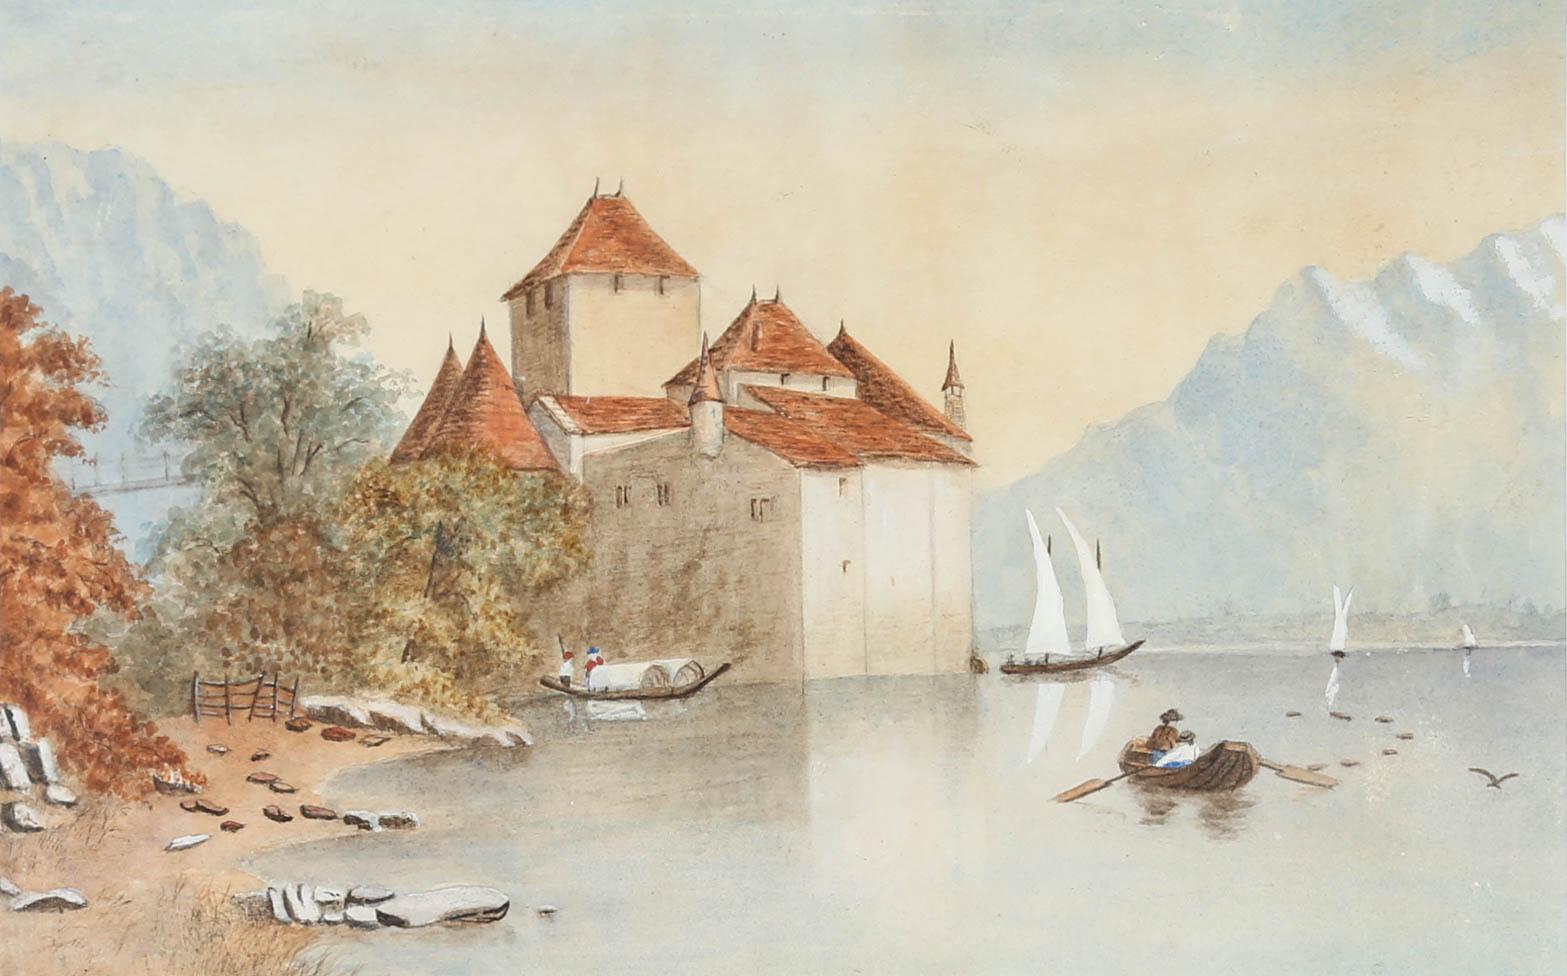 A fine late 19th watercolour depiction of the idyllic Chillon Castle on Lake Geneva. The painting is unsigned and handsomely presented in a 19th Century gilt frame with ornate floral corners and beaded strap work, finished with a card mount. On wove.